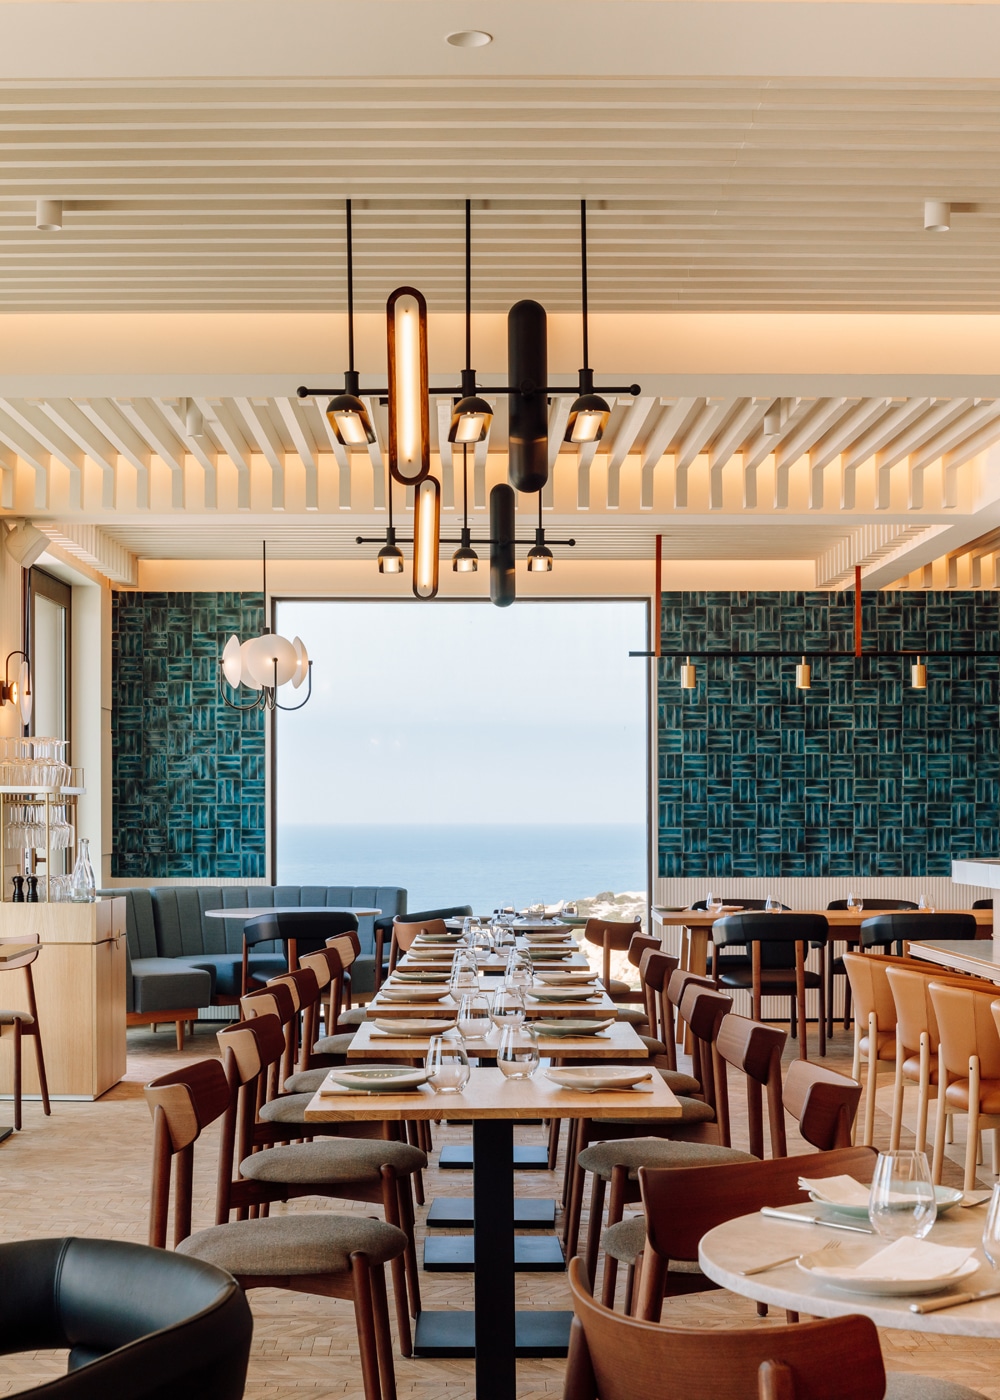 Aethos Ericeira Hotel, Foto: Francisco Nogueira - Architectural Photography